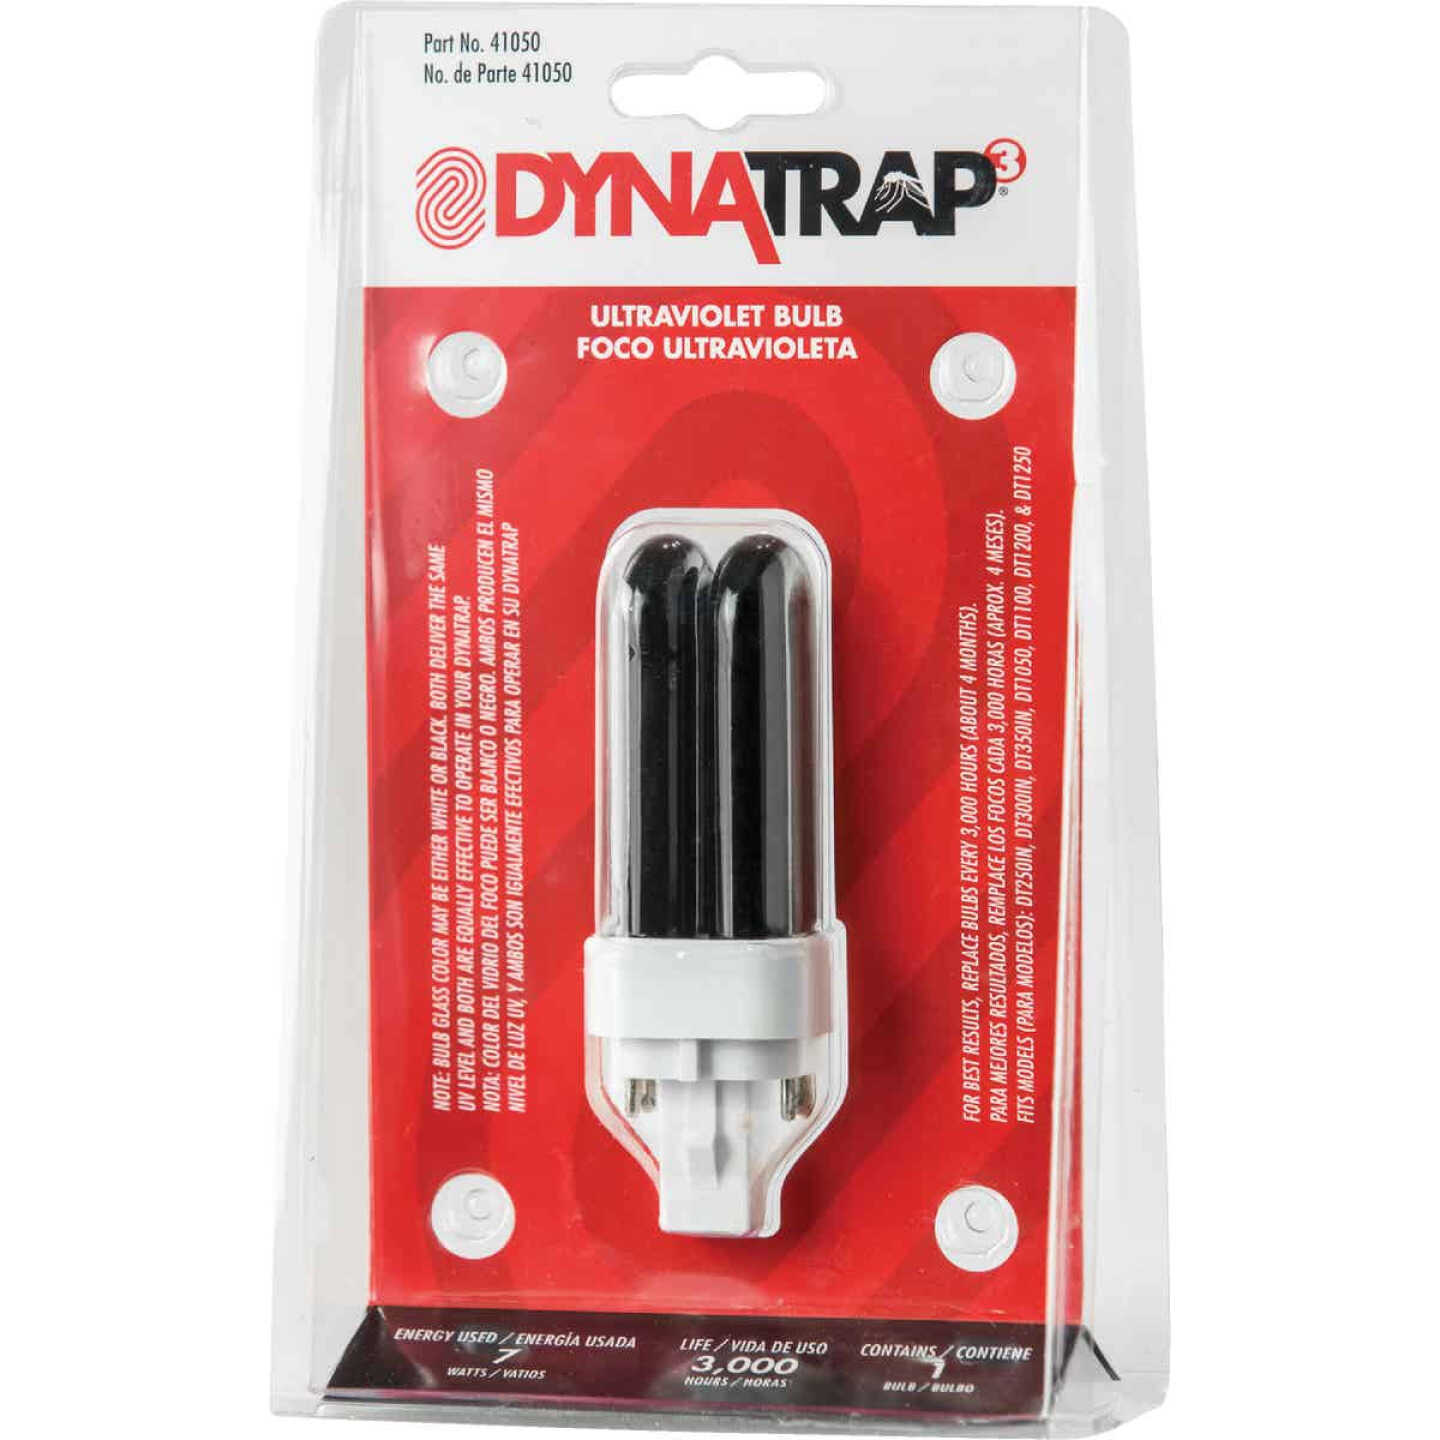 Dynatrap Reusable Indoor/Outdoor 1/2 Acre Coverage Area Insect